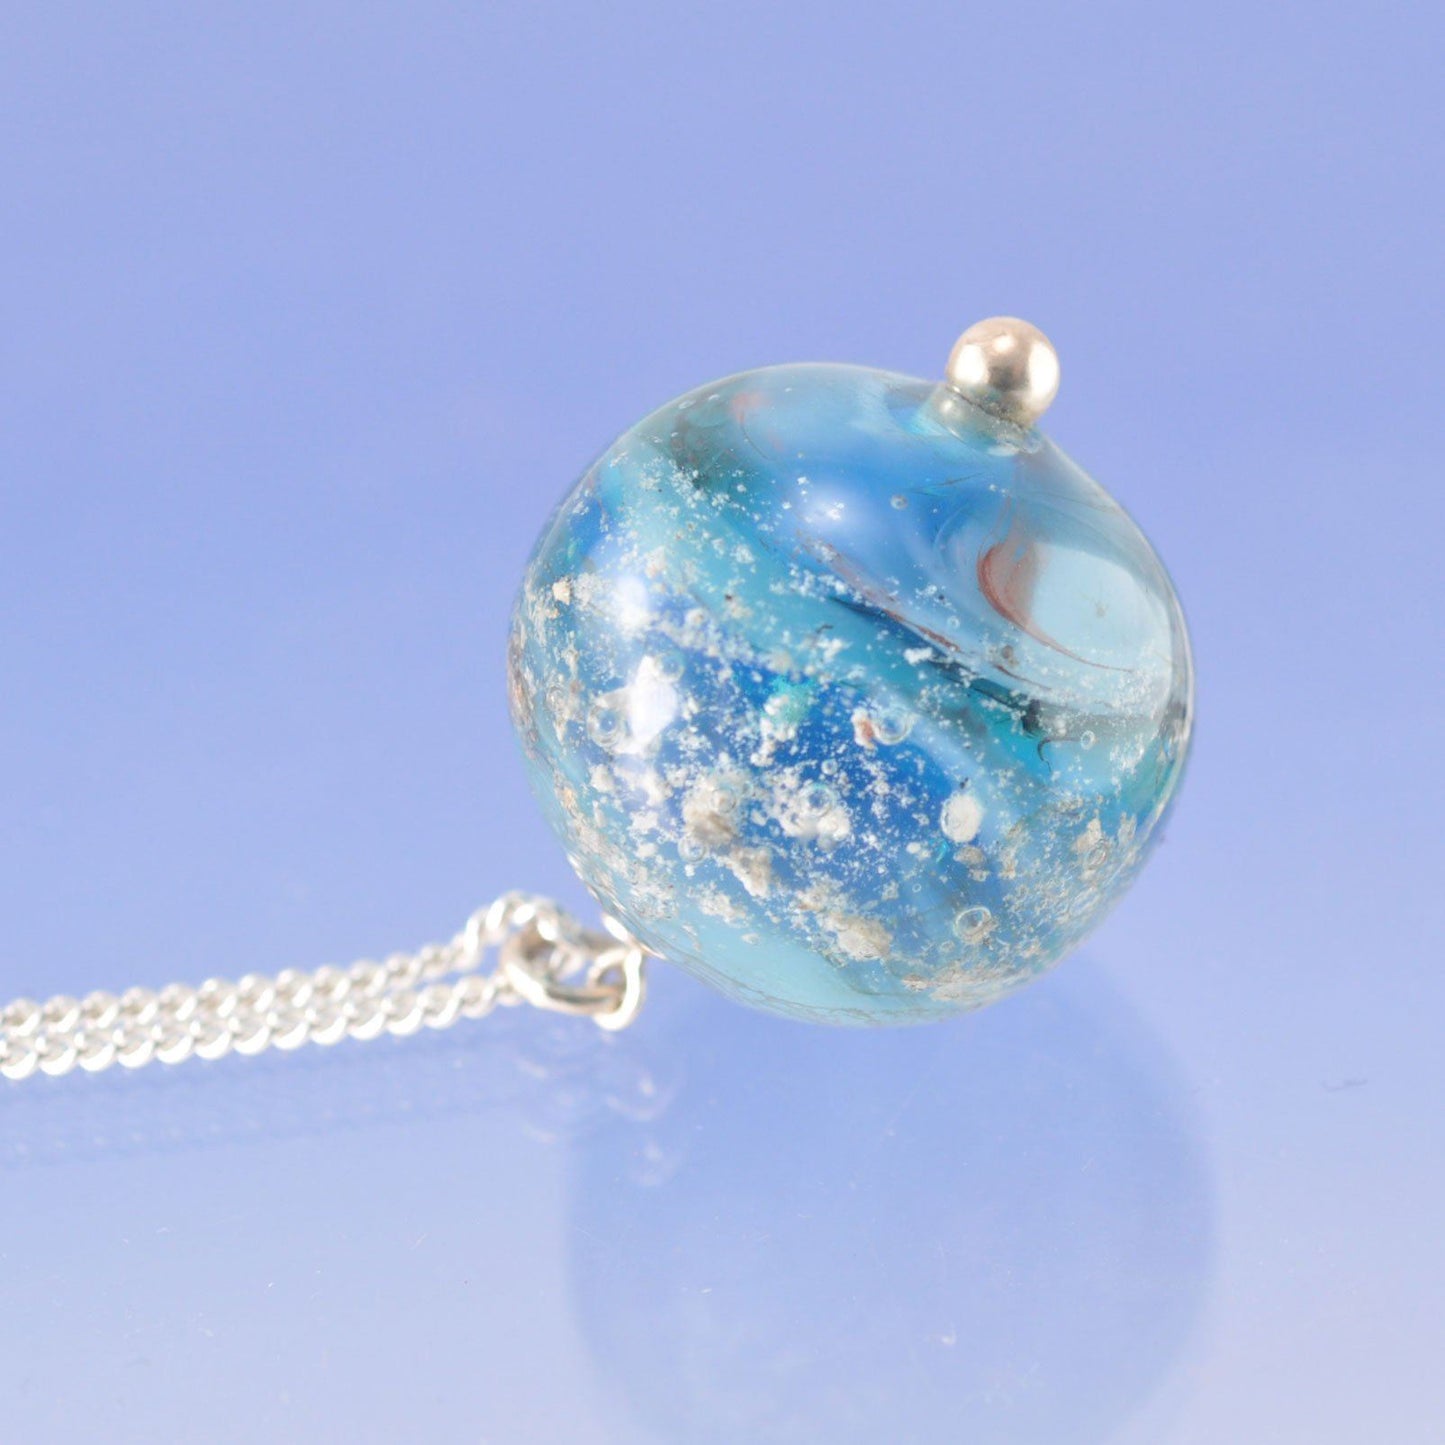 Cremation Ashes Glass Necklace - Glass Globe Jewellery Pendant by Chris Parry Jewellery